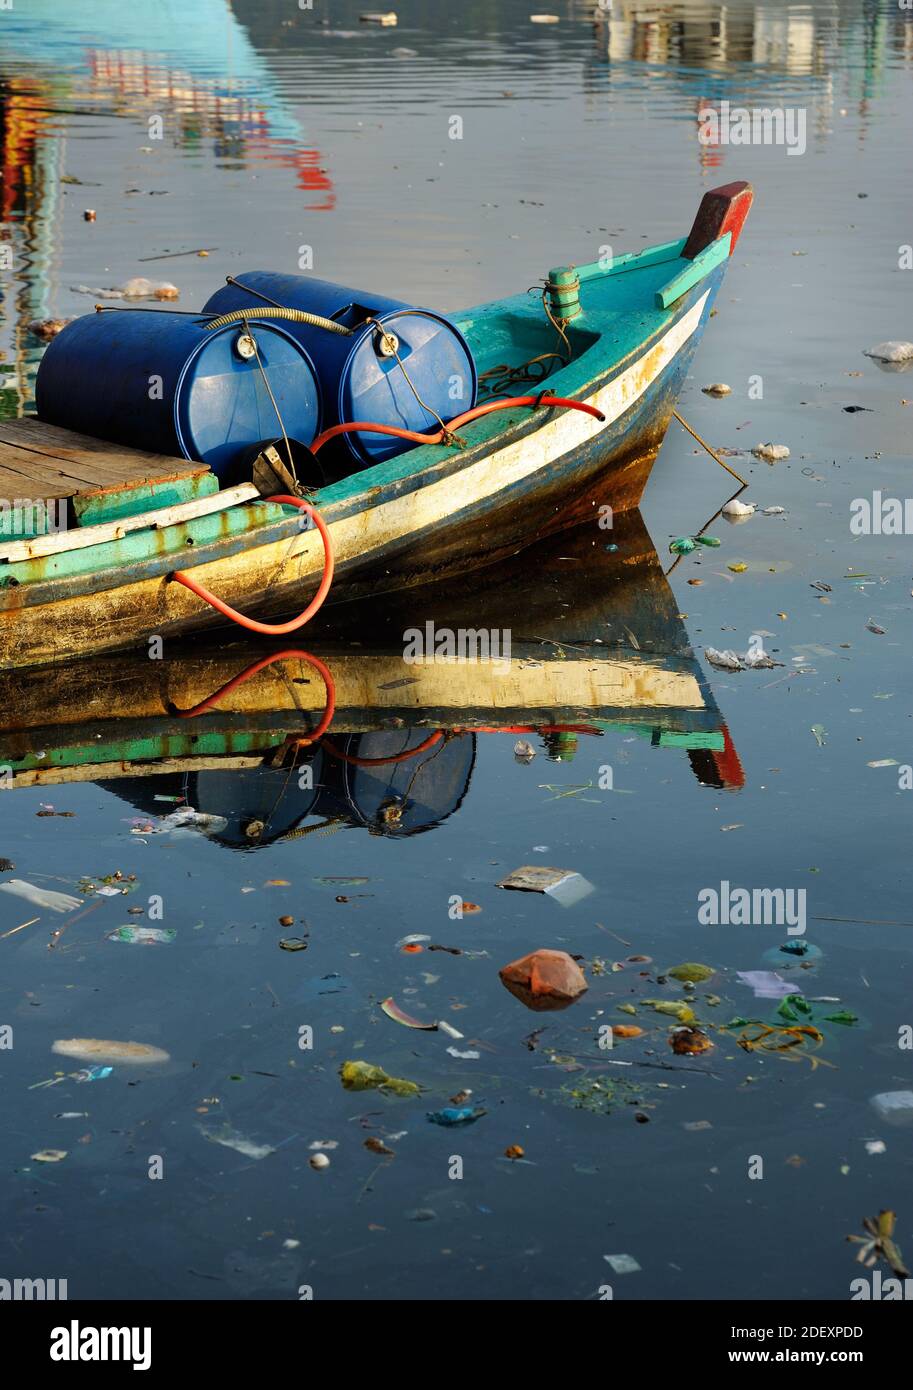 Thrown away garbage floating in polluted sea water. Boat with with gasoline barrels in Phu Quoc island, Vietnam. Stock Photo